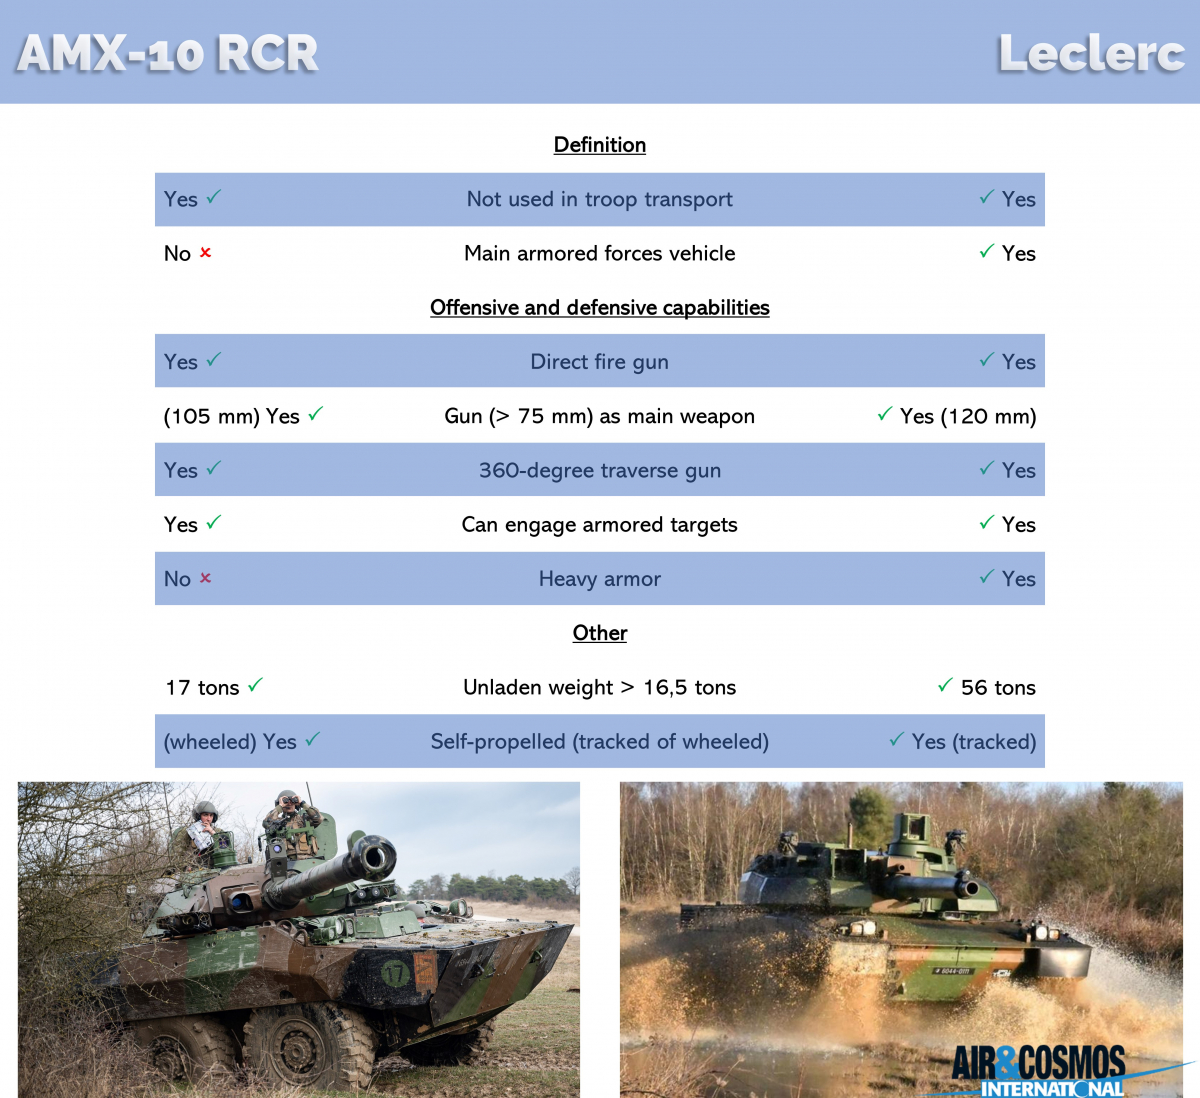 Comparison between an AMX-10 RCR and a Leclerc battle tank with respect to the NATO definition.